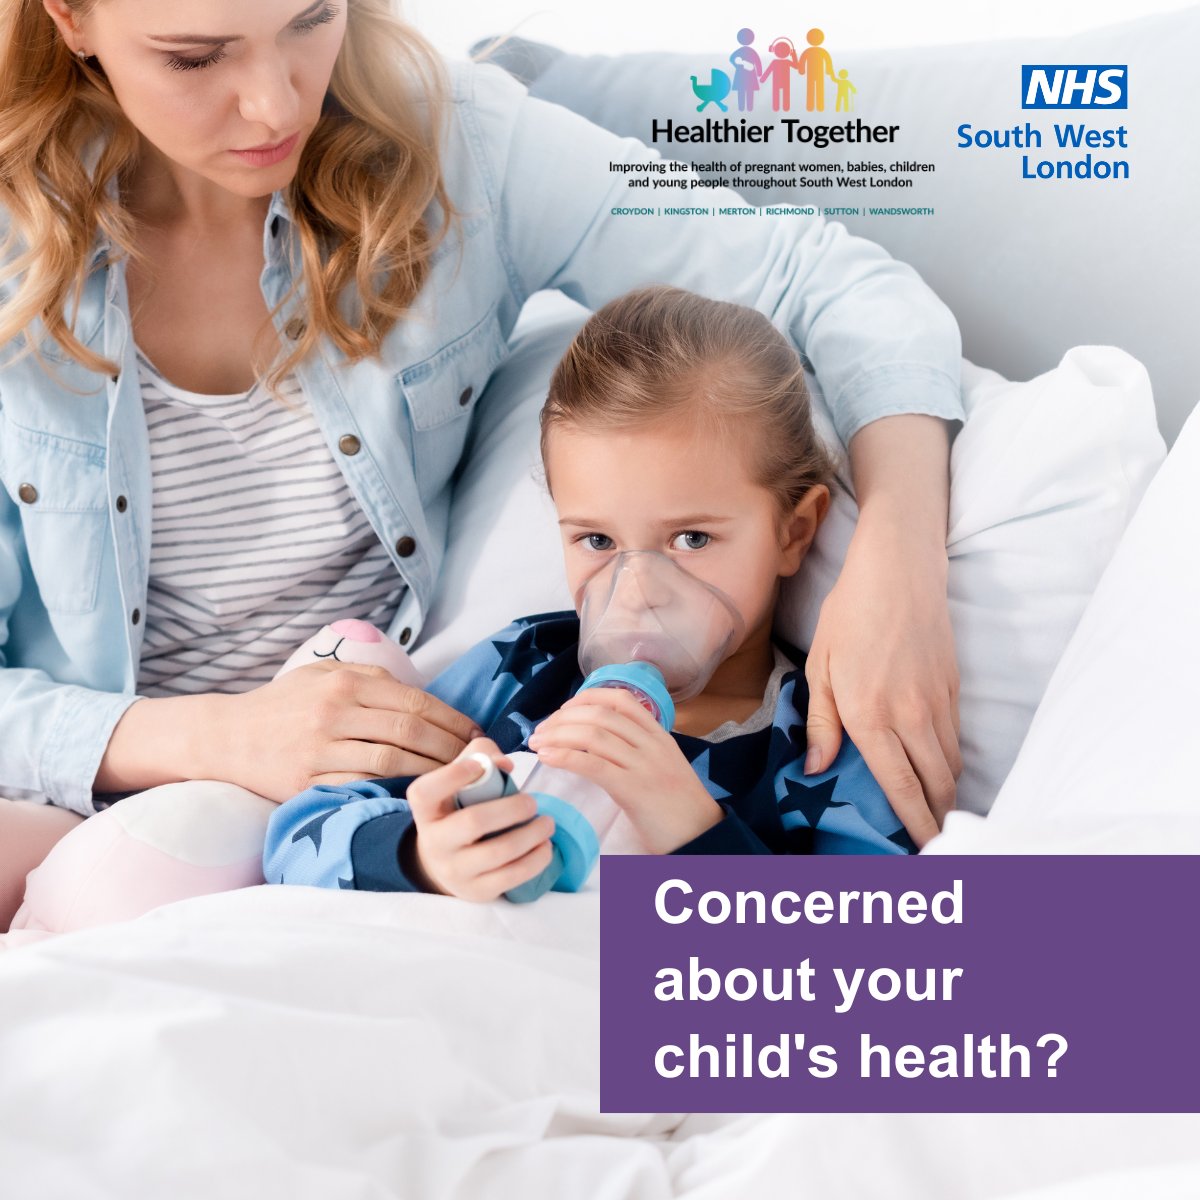 Concerned about your child’s health? 🧒🌡️ Find expert advice on common illnesses such as fever and breathing problems from local health professionals on the Healthier Together website 👉 SWLondon-HealthierTogether.nhs.uk